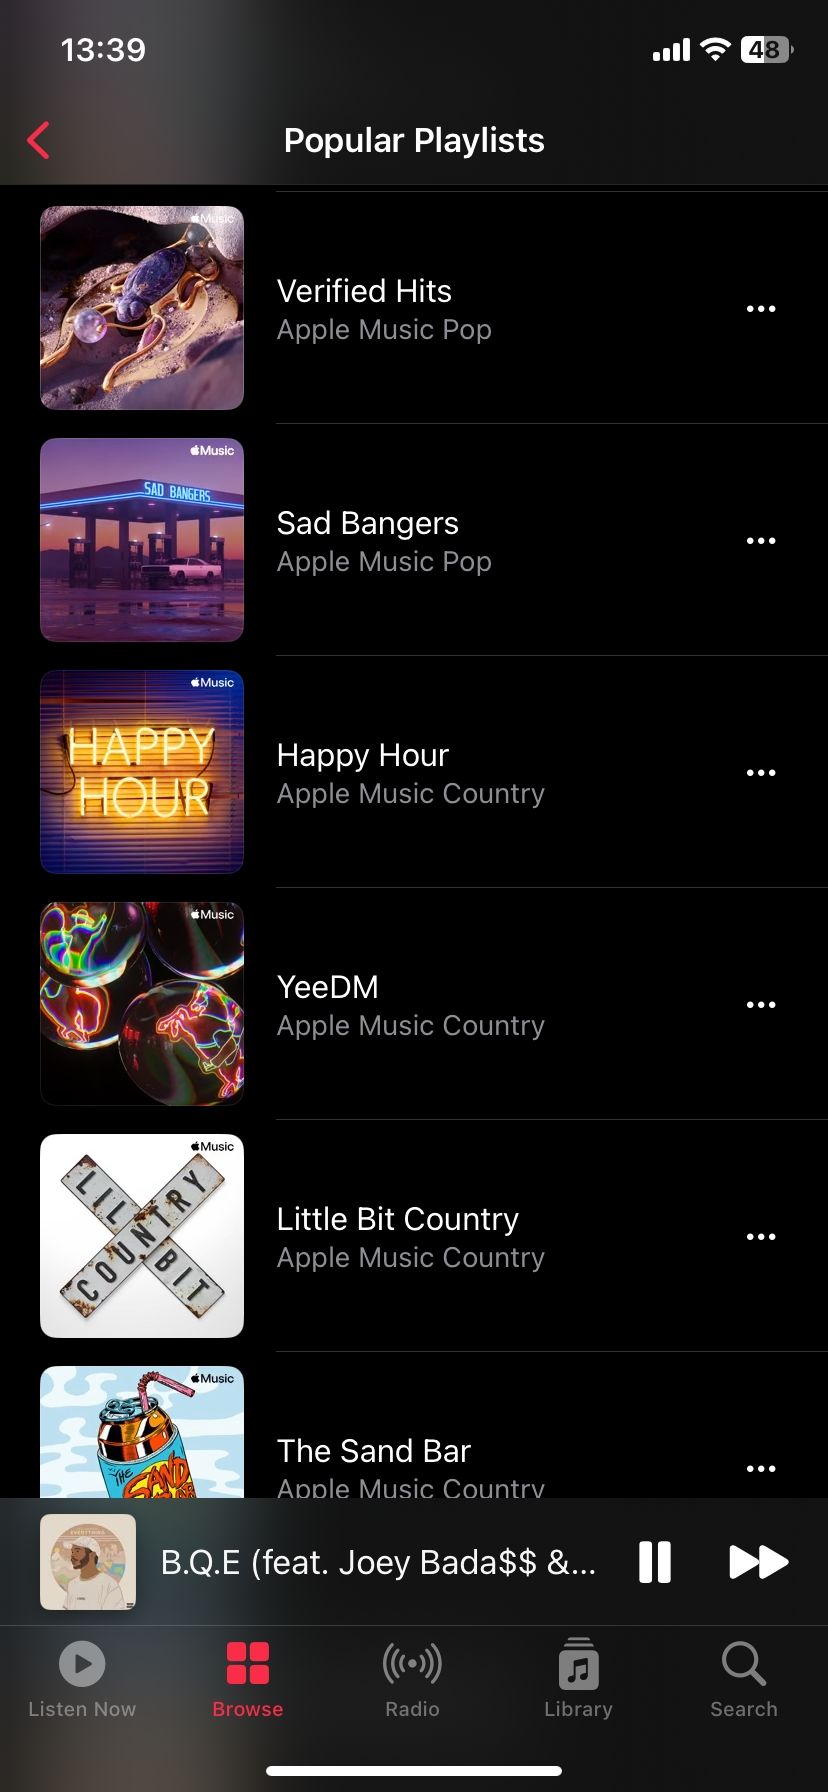 A list of Apple Music curated playlists